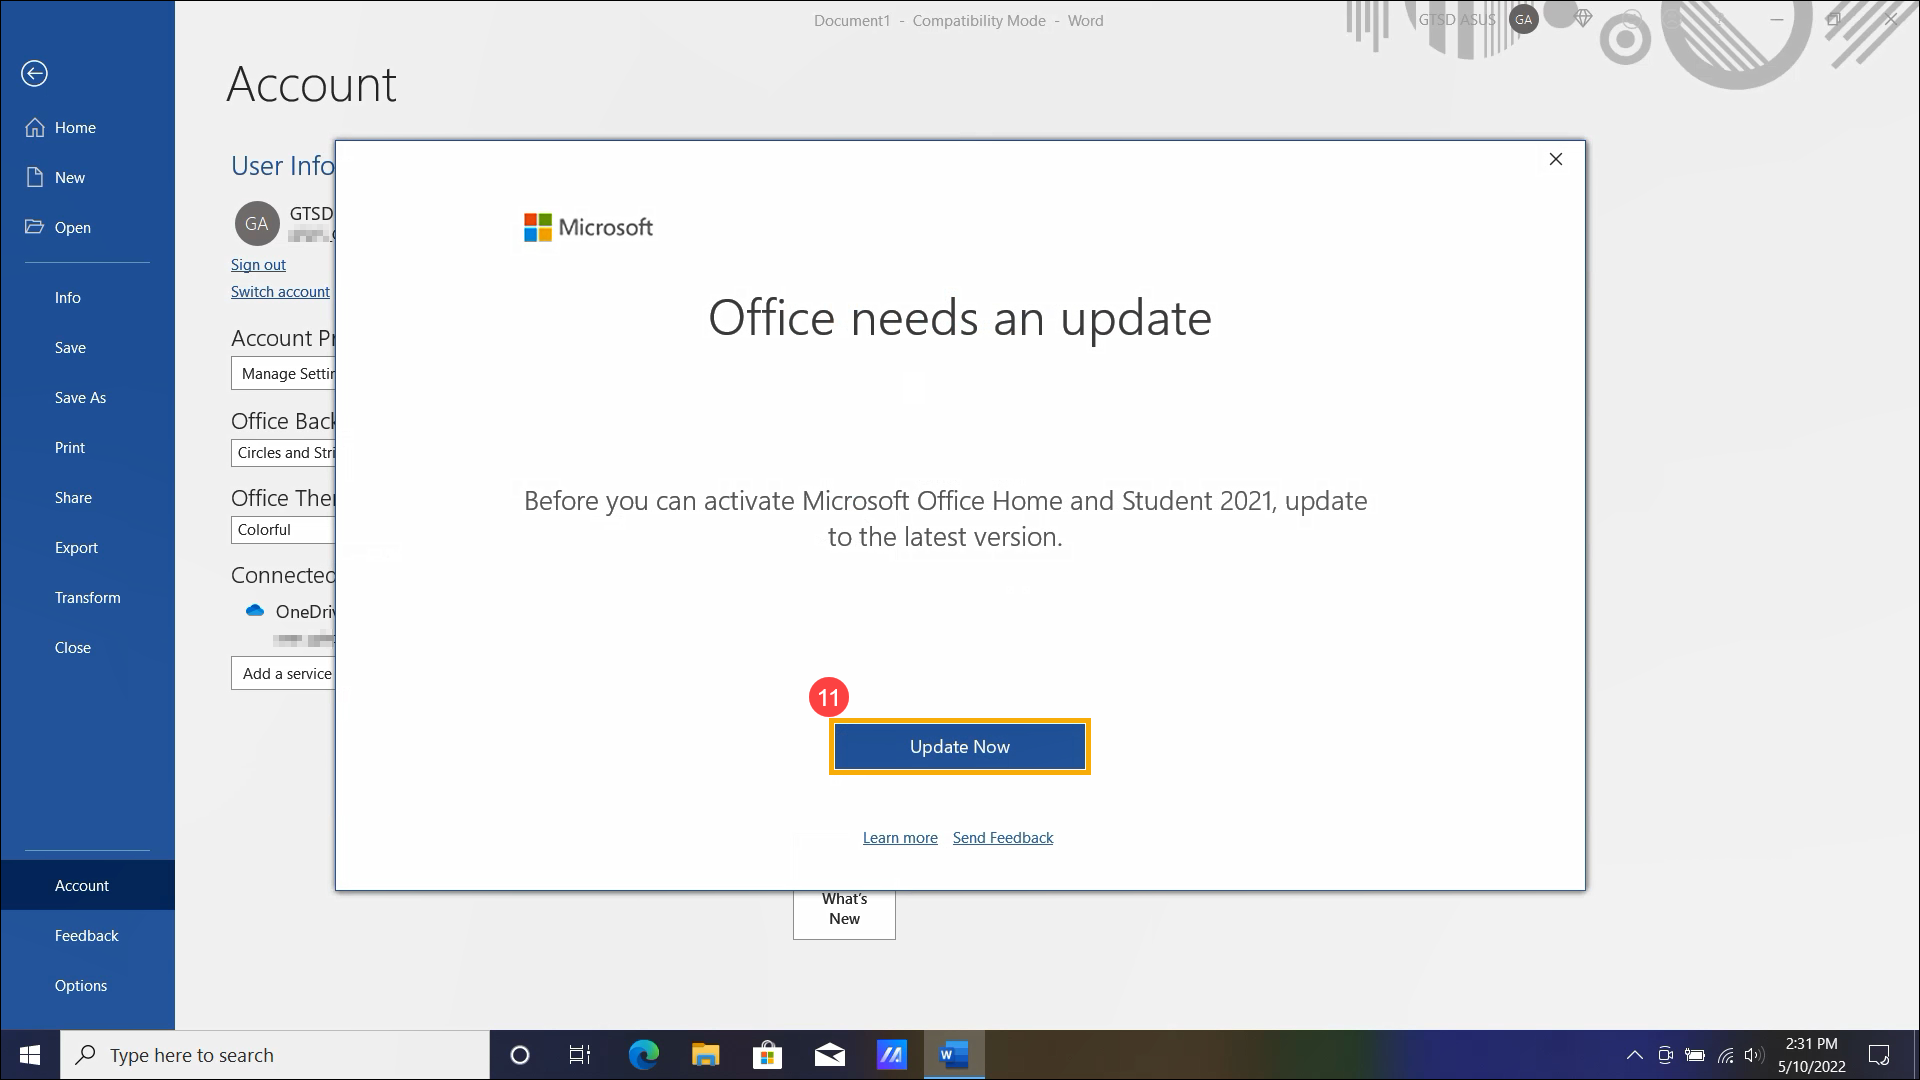 What's new in Office 2021 - Microsoft Support